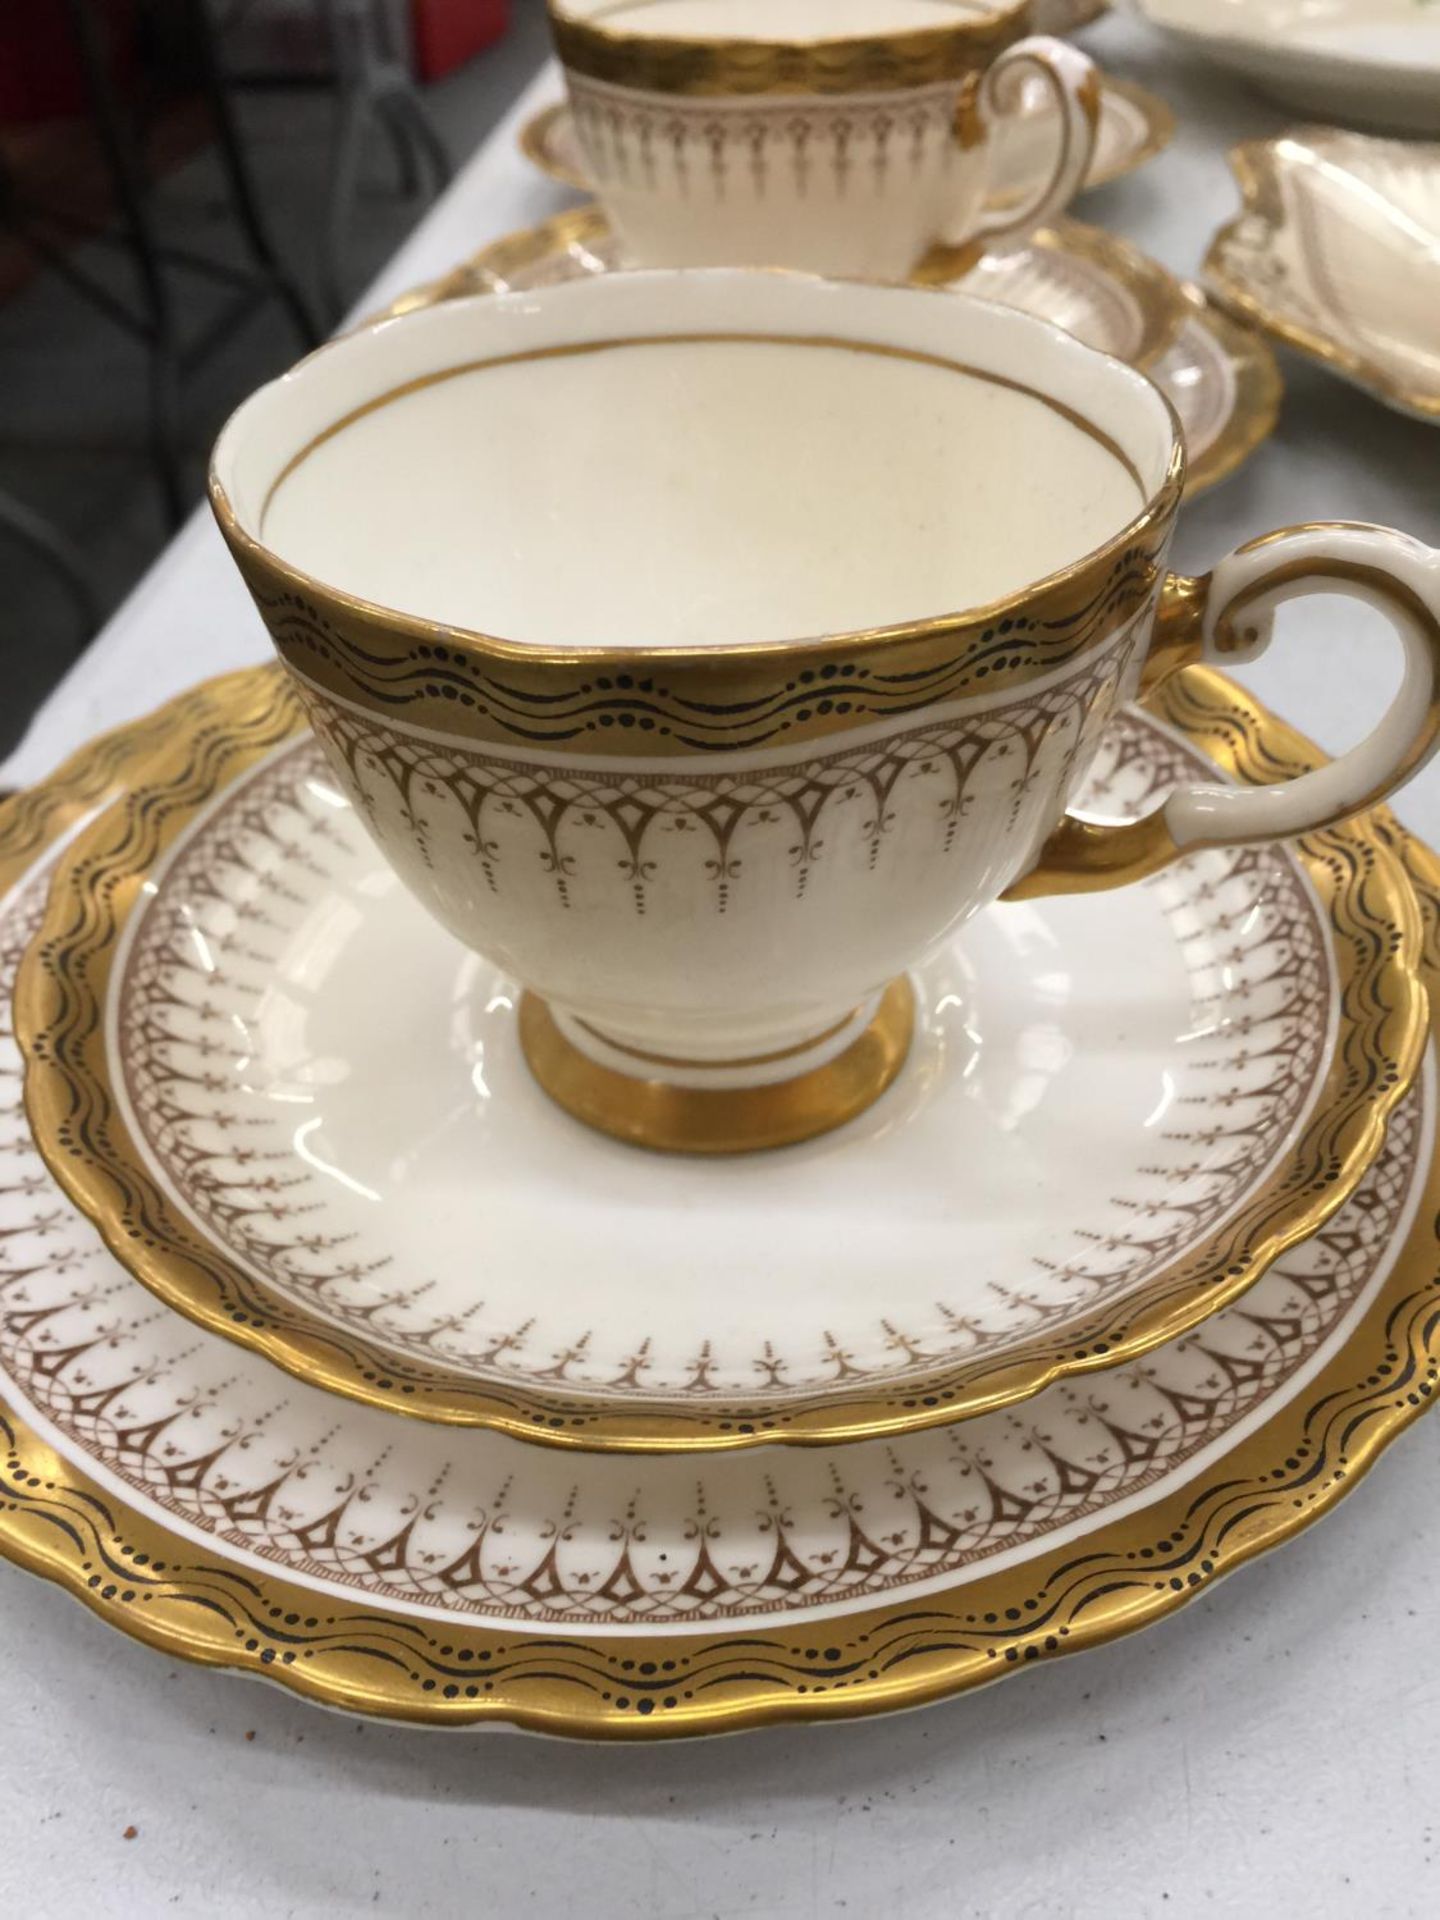 A QUANTITY OF TEAWARE TO INCLUDE TUSCAN CHINA GILT DECORATED TEACUPS, SAUCERS, PLATES, ETC, PLUS - Image 3 of 5